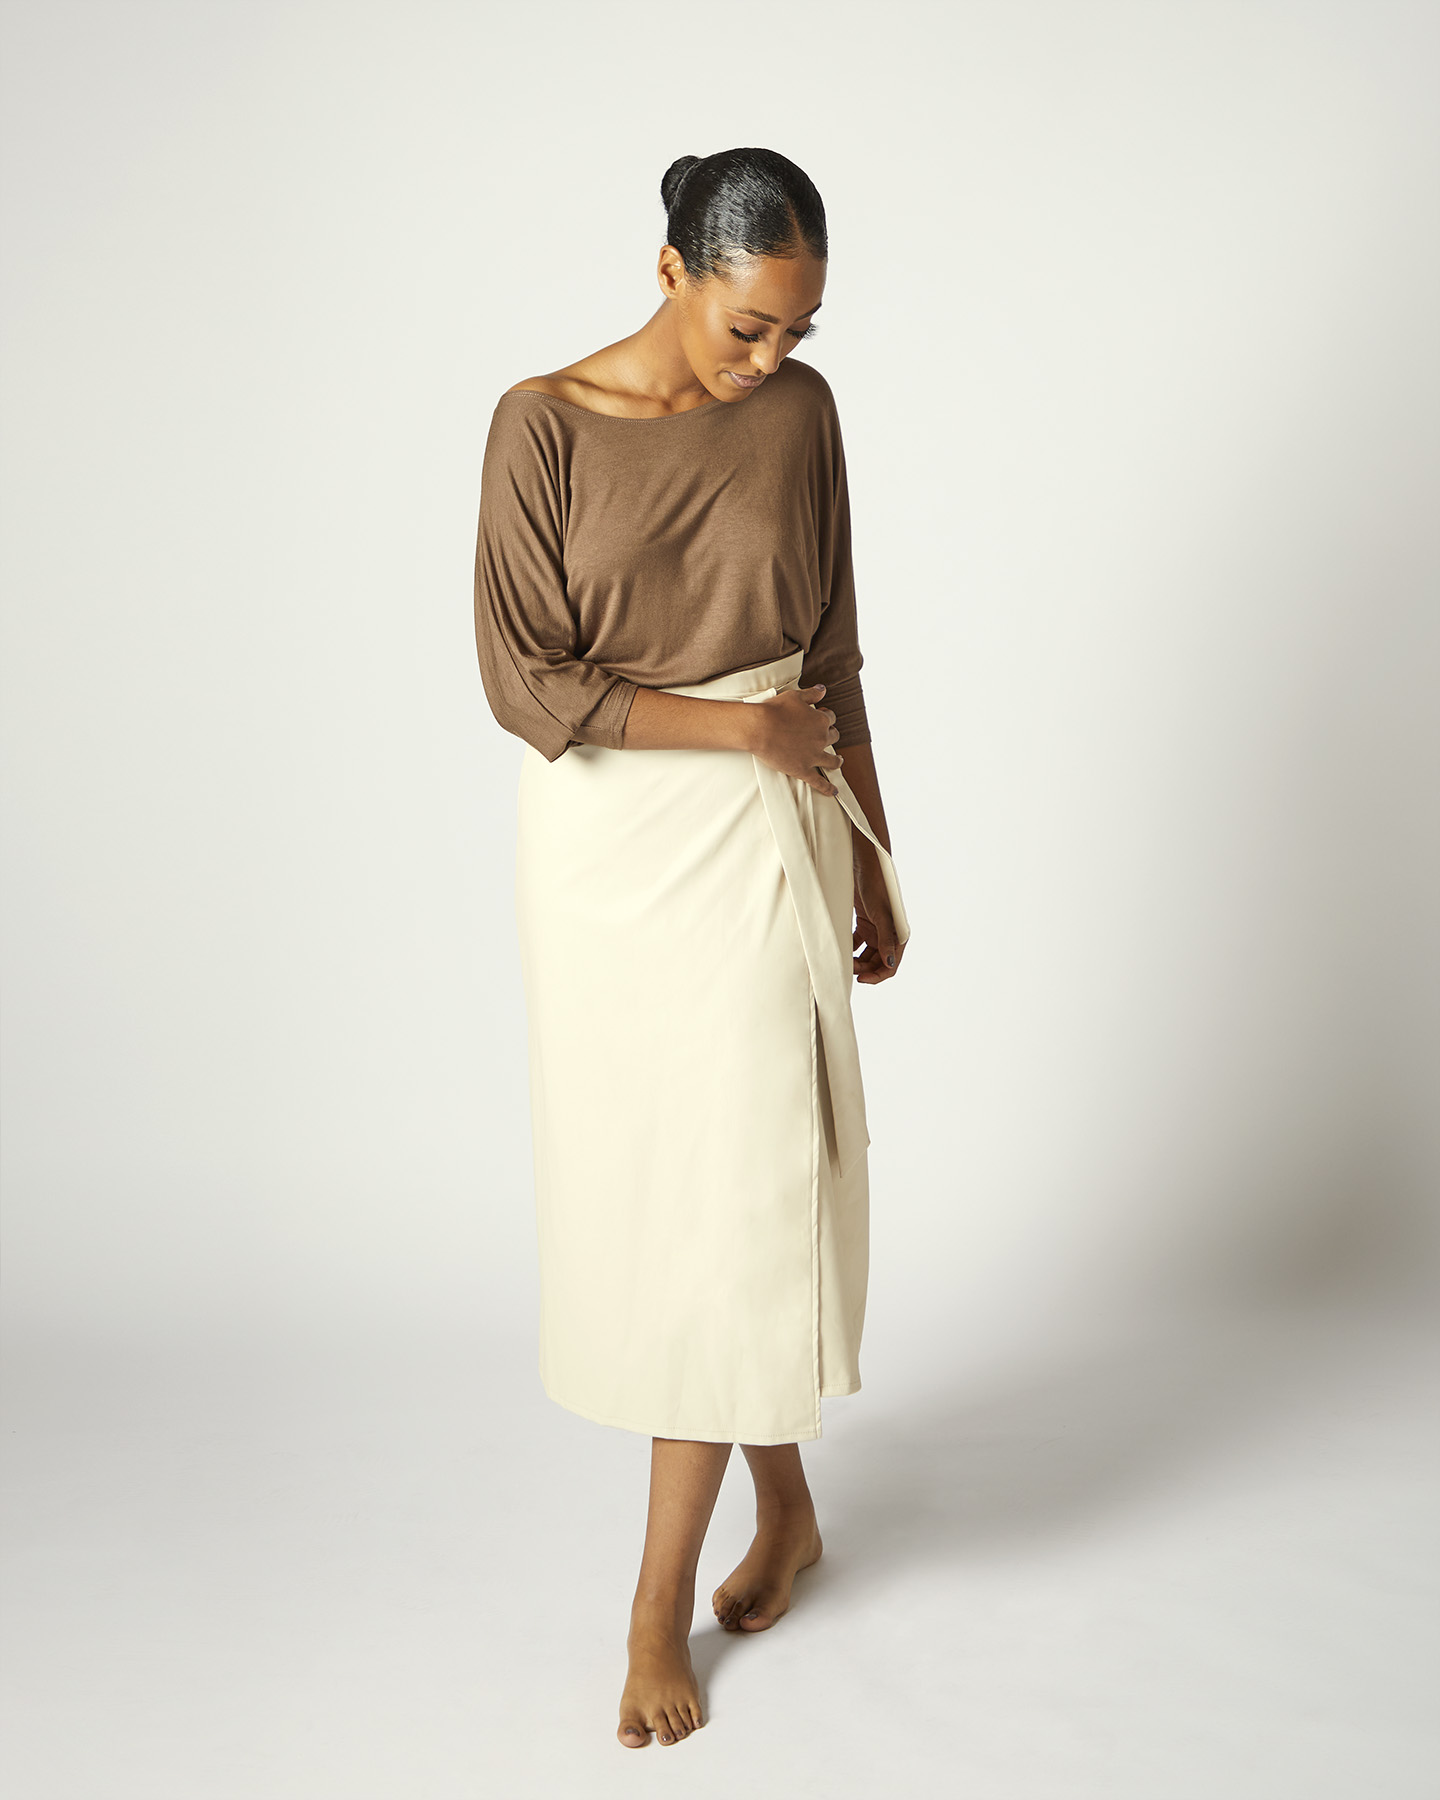 Fashion Photograph of woman wearing Clothing by Taylor Jay Collection